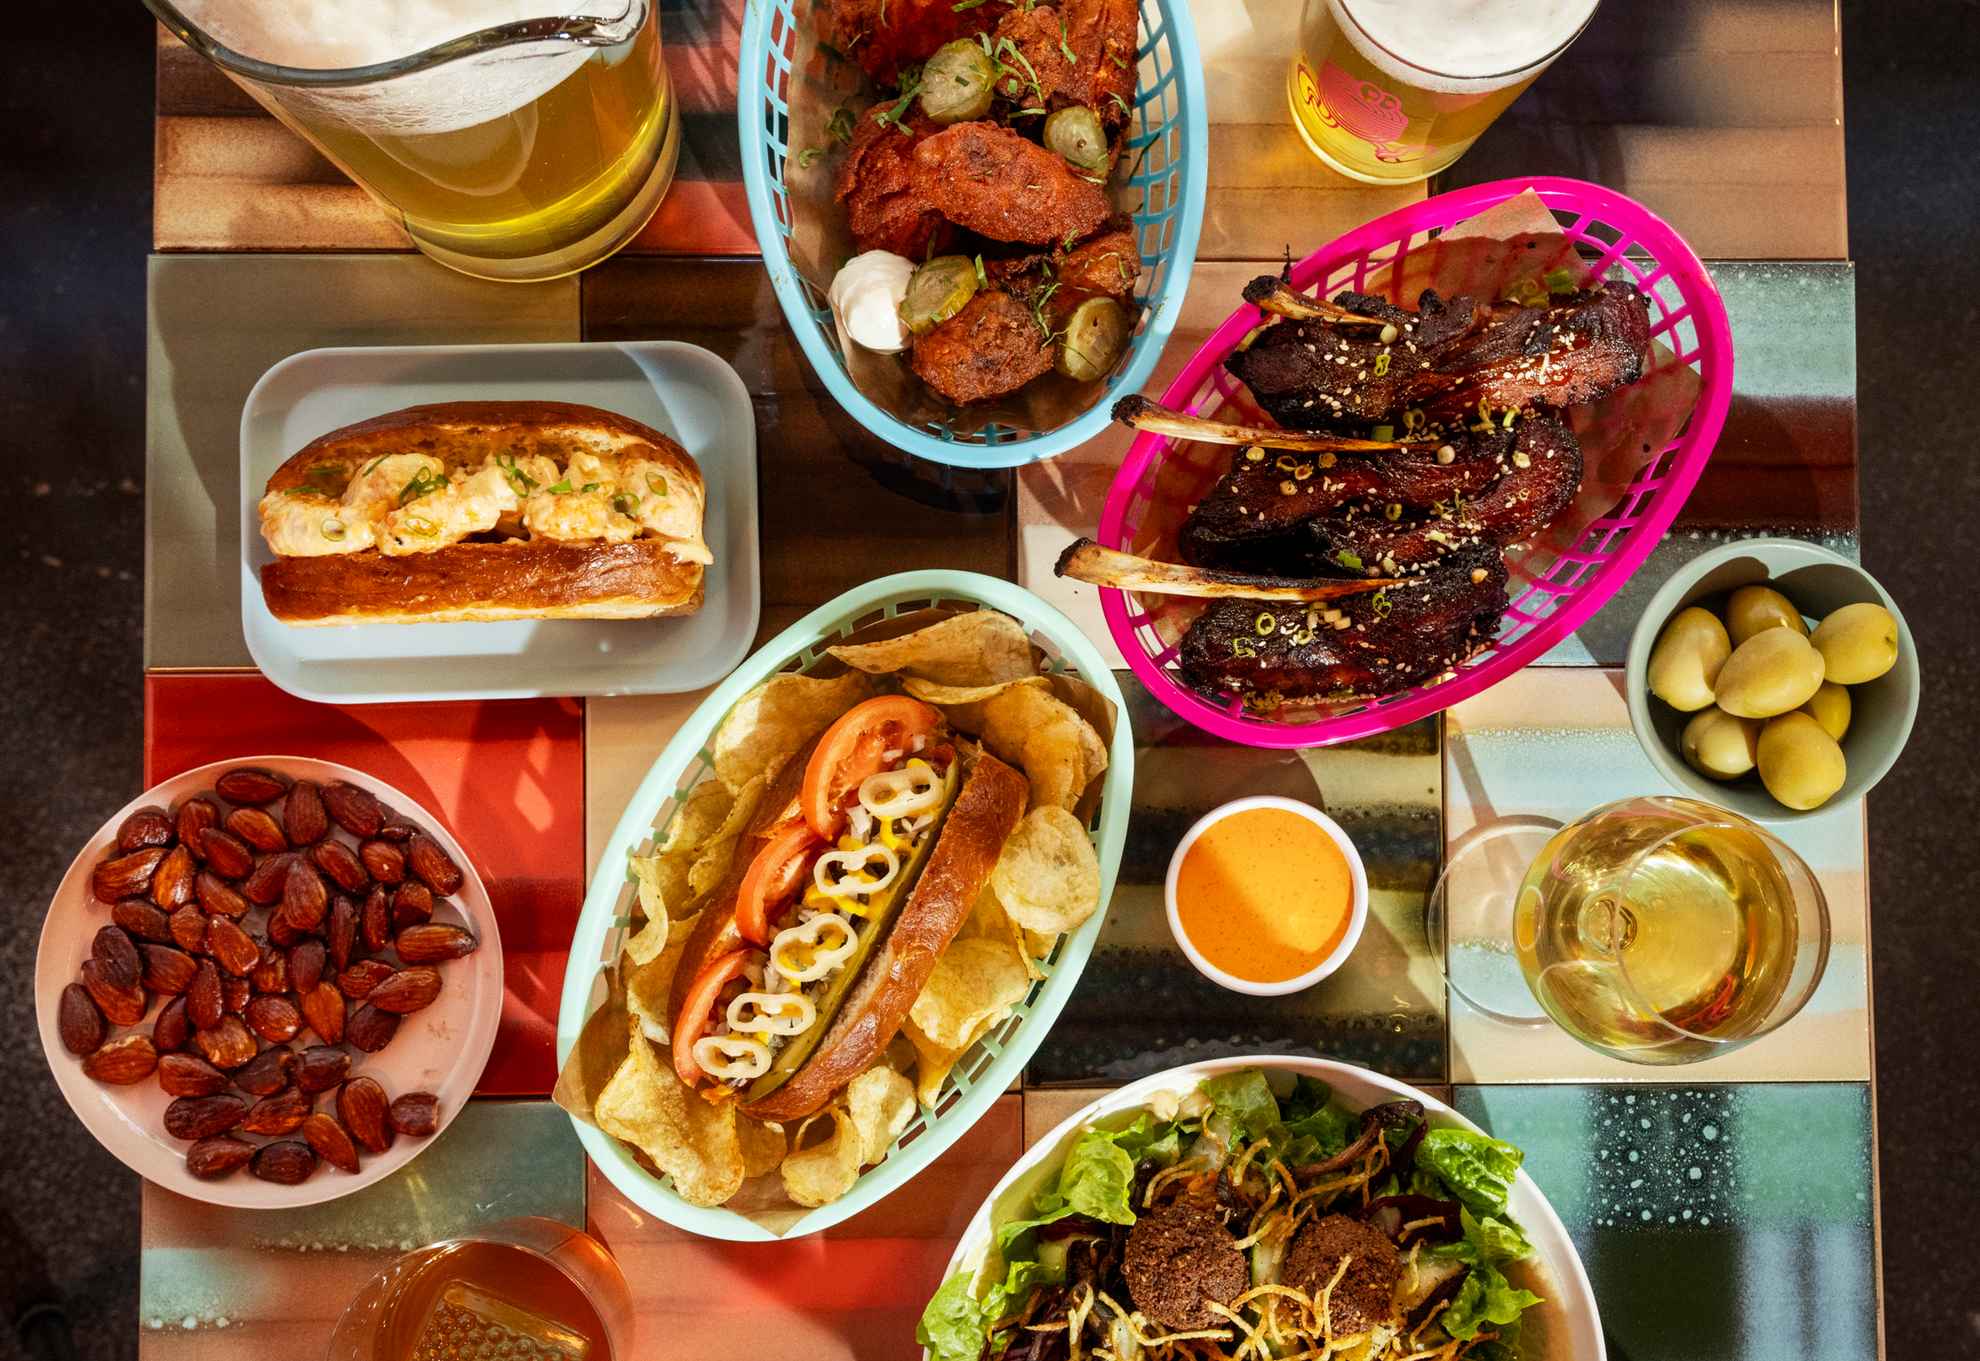 A square table filled with colourful streetfood in different baskets and on plates, as well as glasses of beer and wine.